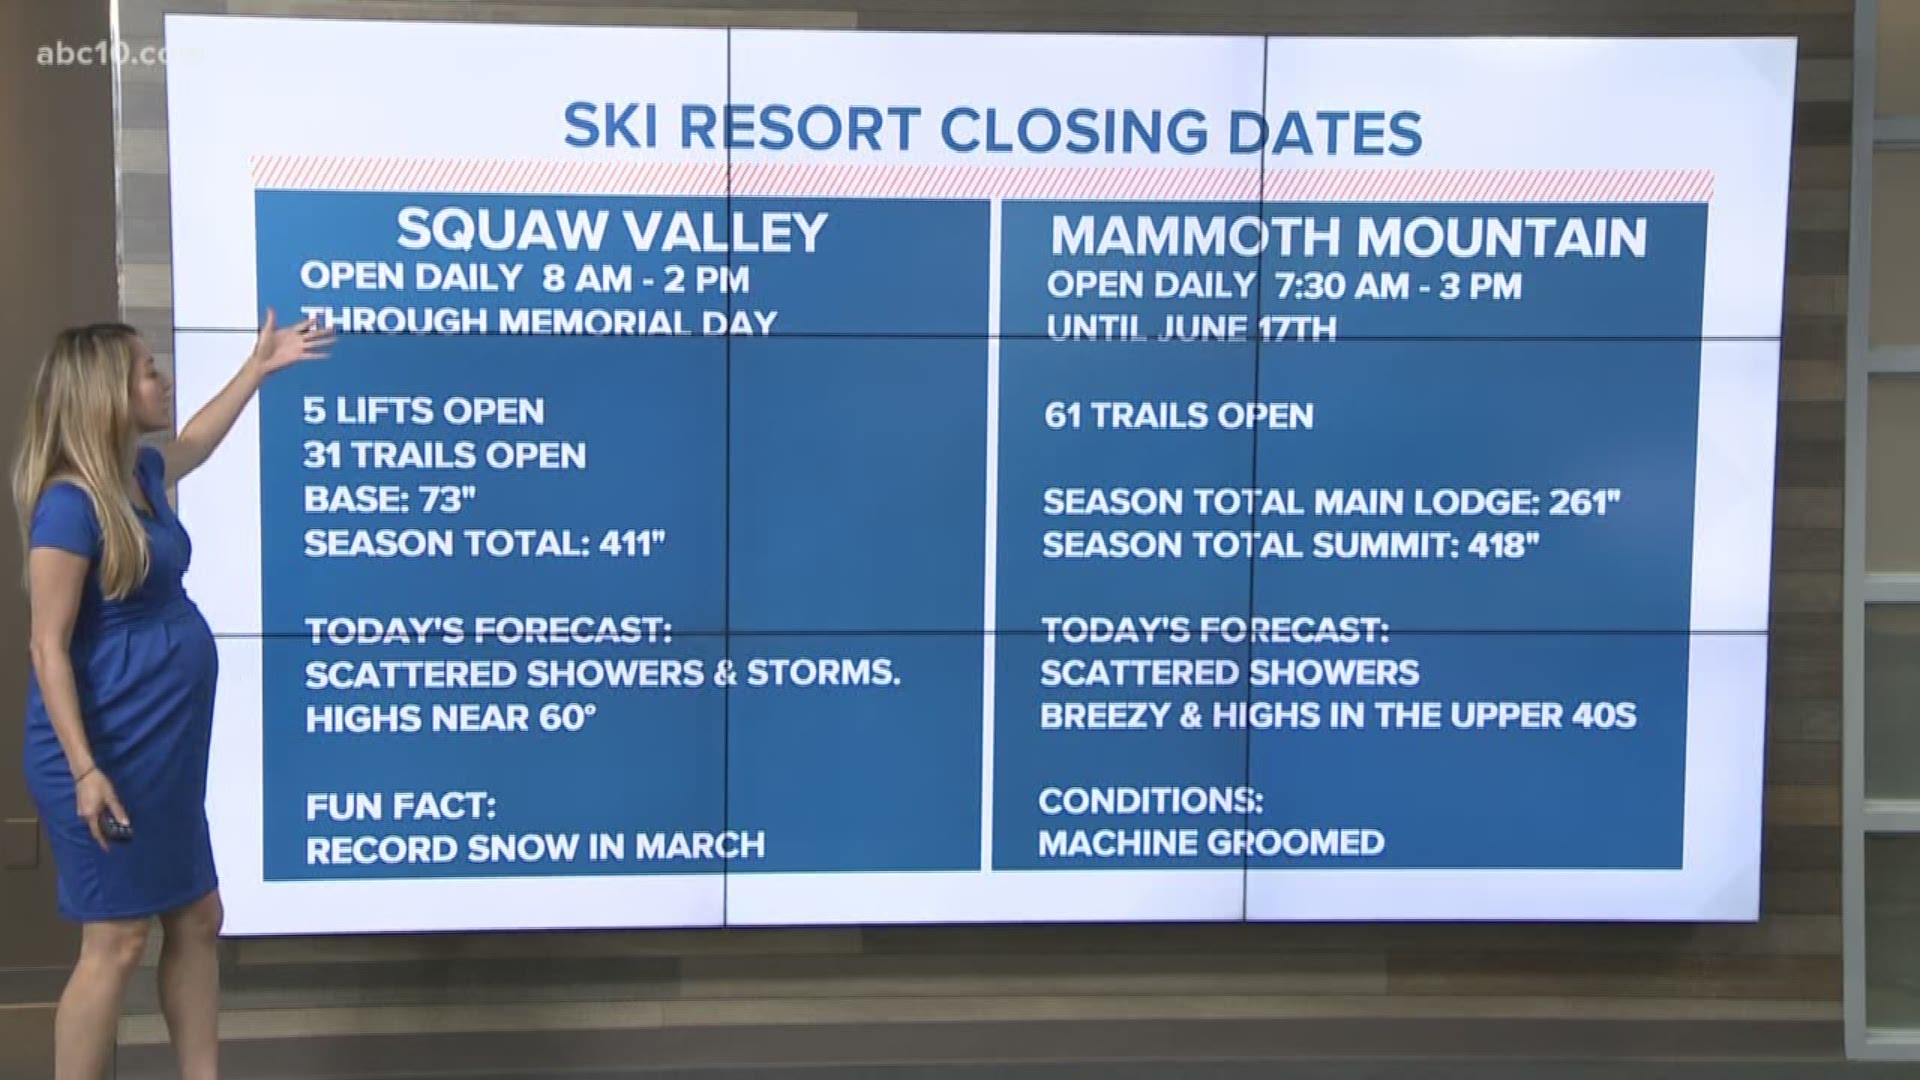 Squaw Valley and Mammoth Mountain are set to close soon, so get those skis out one last time.